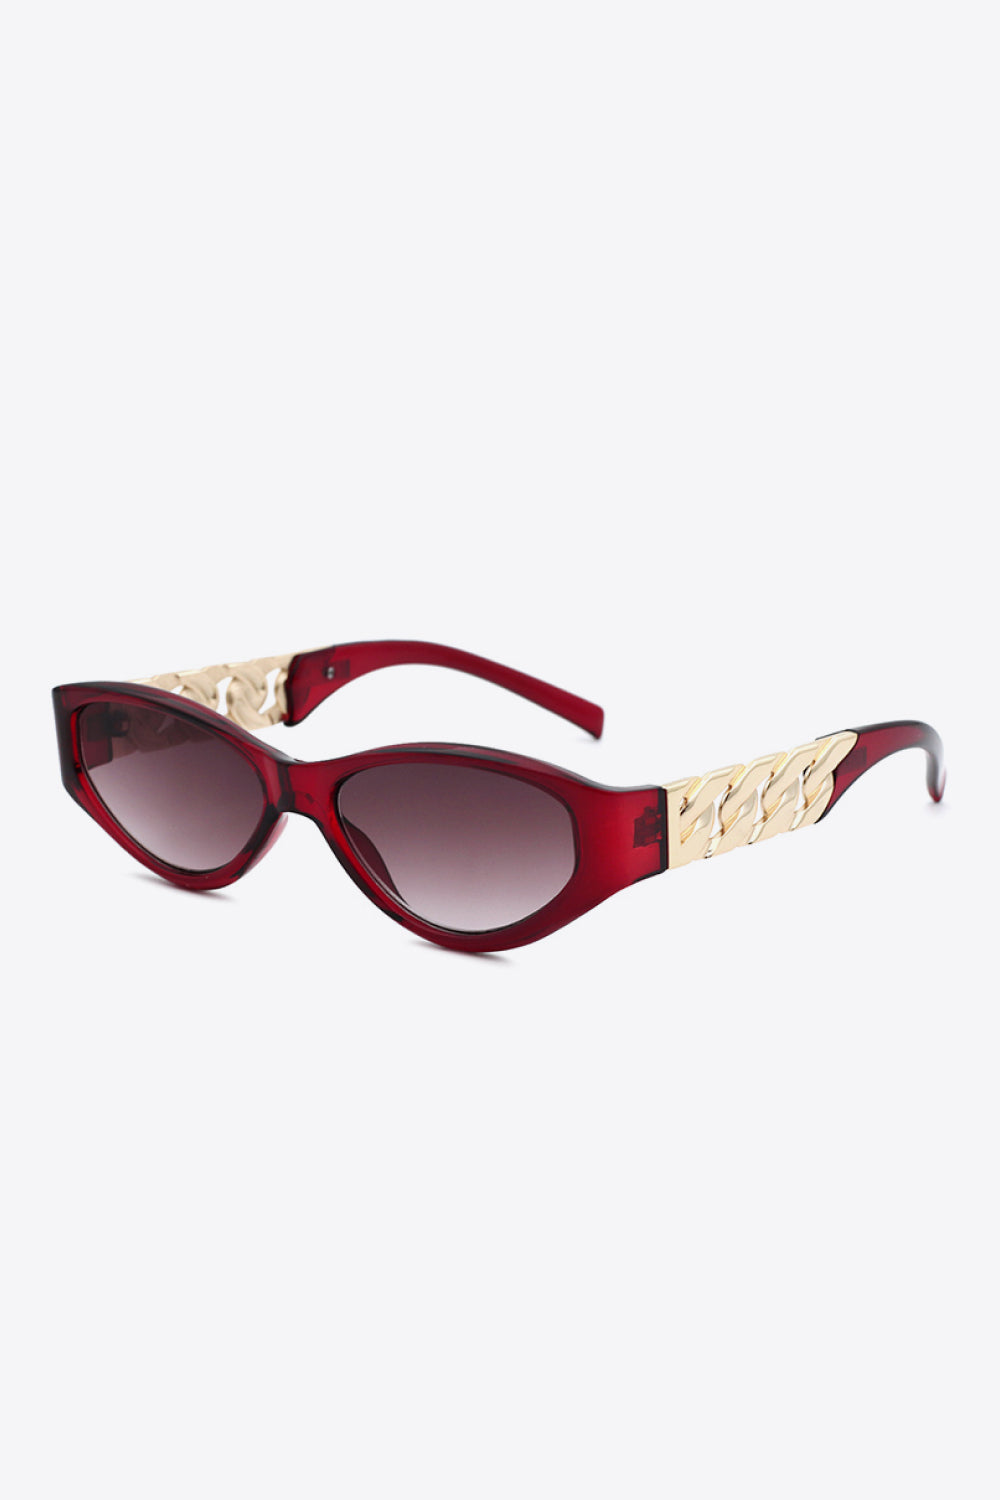 Chain Detail Temple Cat Eye Sunglasses - Deep Red / One Size Girl Code